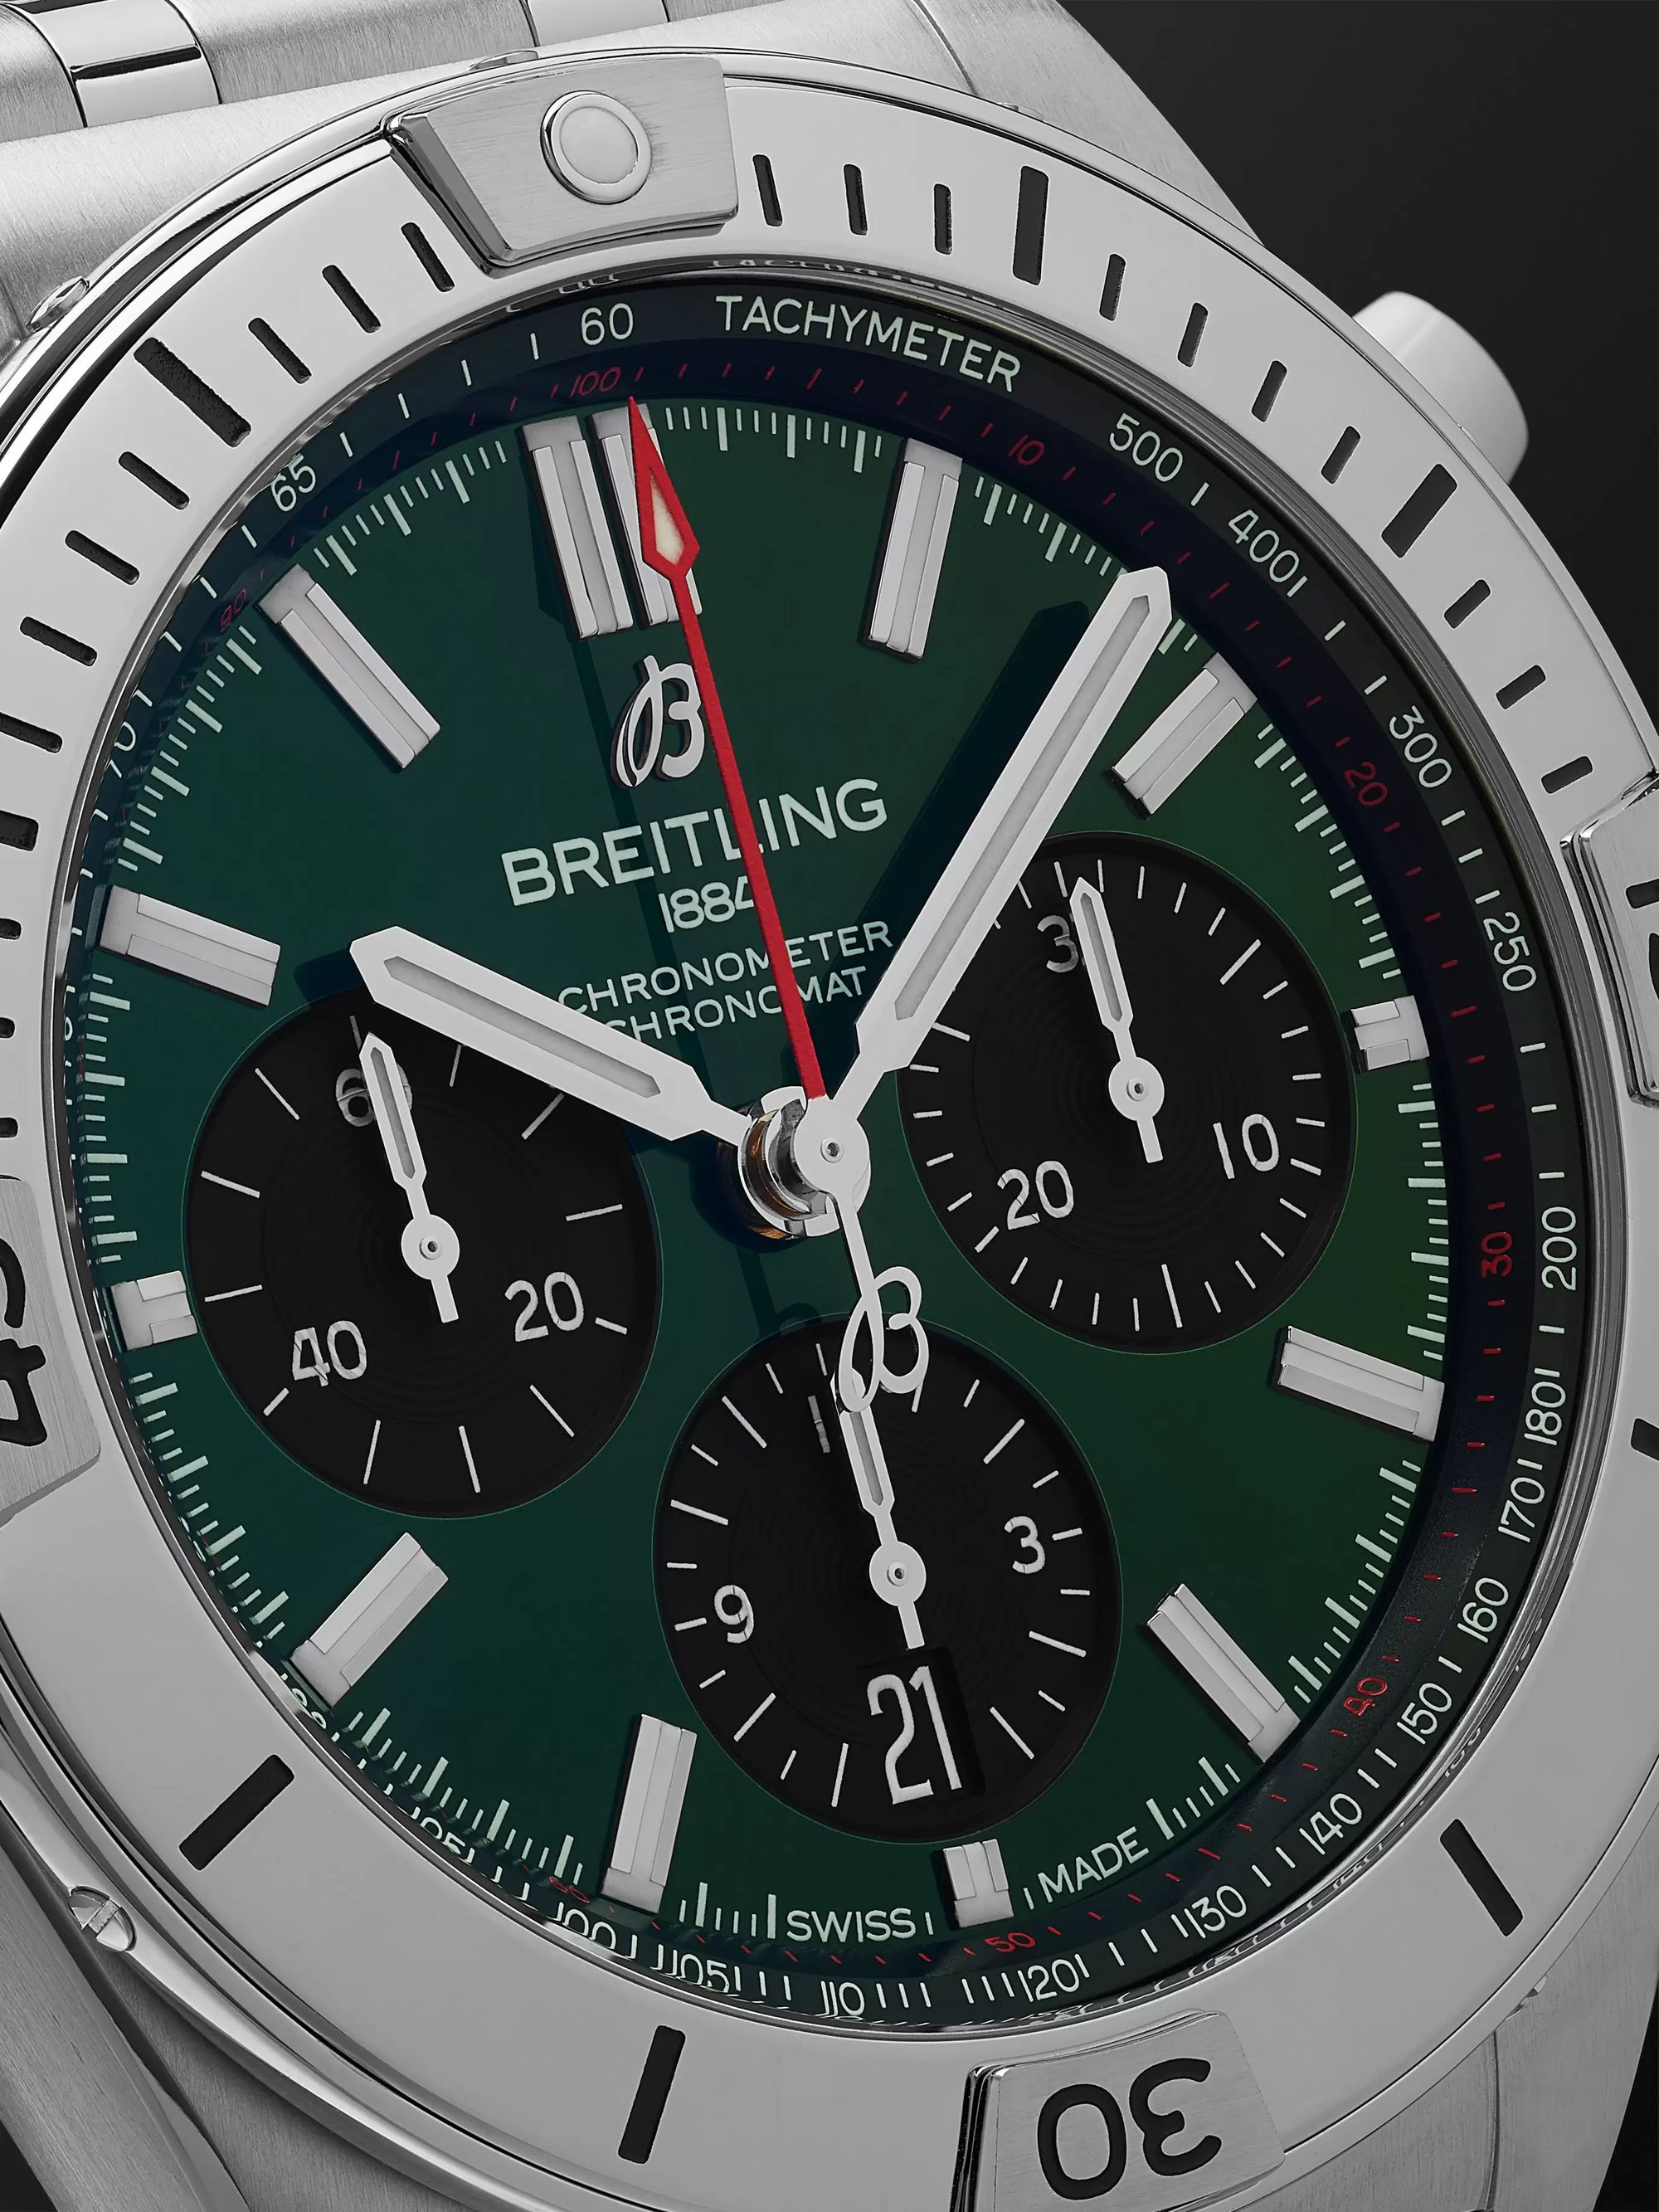 BREITLING Chronomat B01 Bentley Edition Automatic Chronograph 42mm Stainless Steel Watch, Ref. No. AB01343A1L1A1